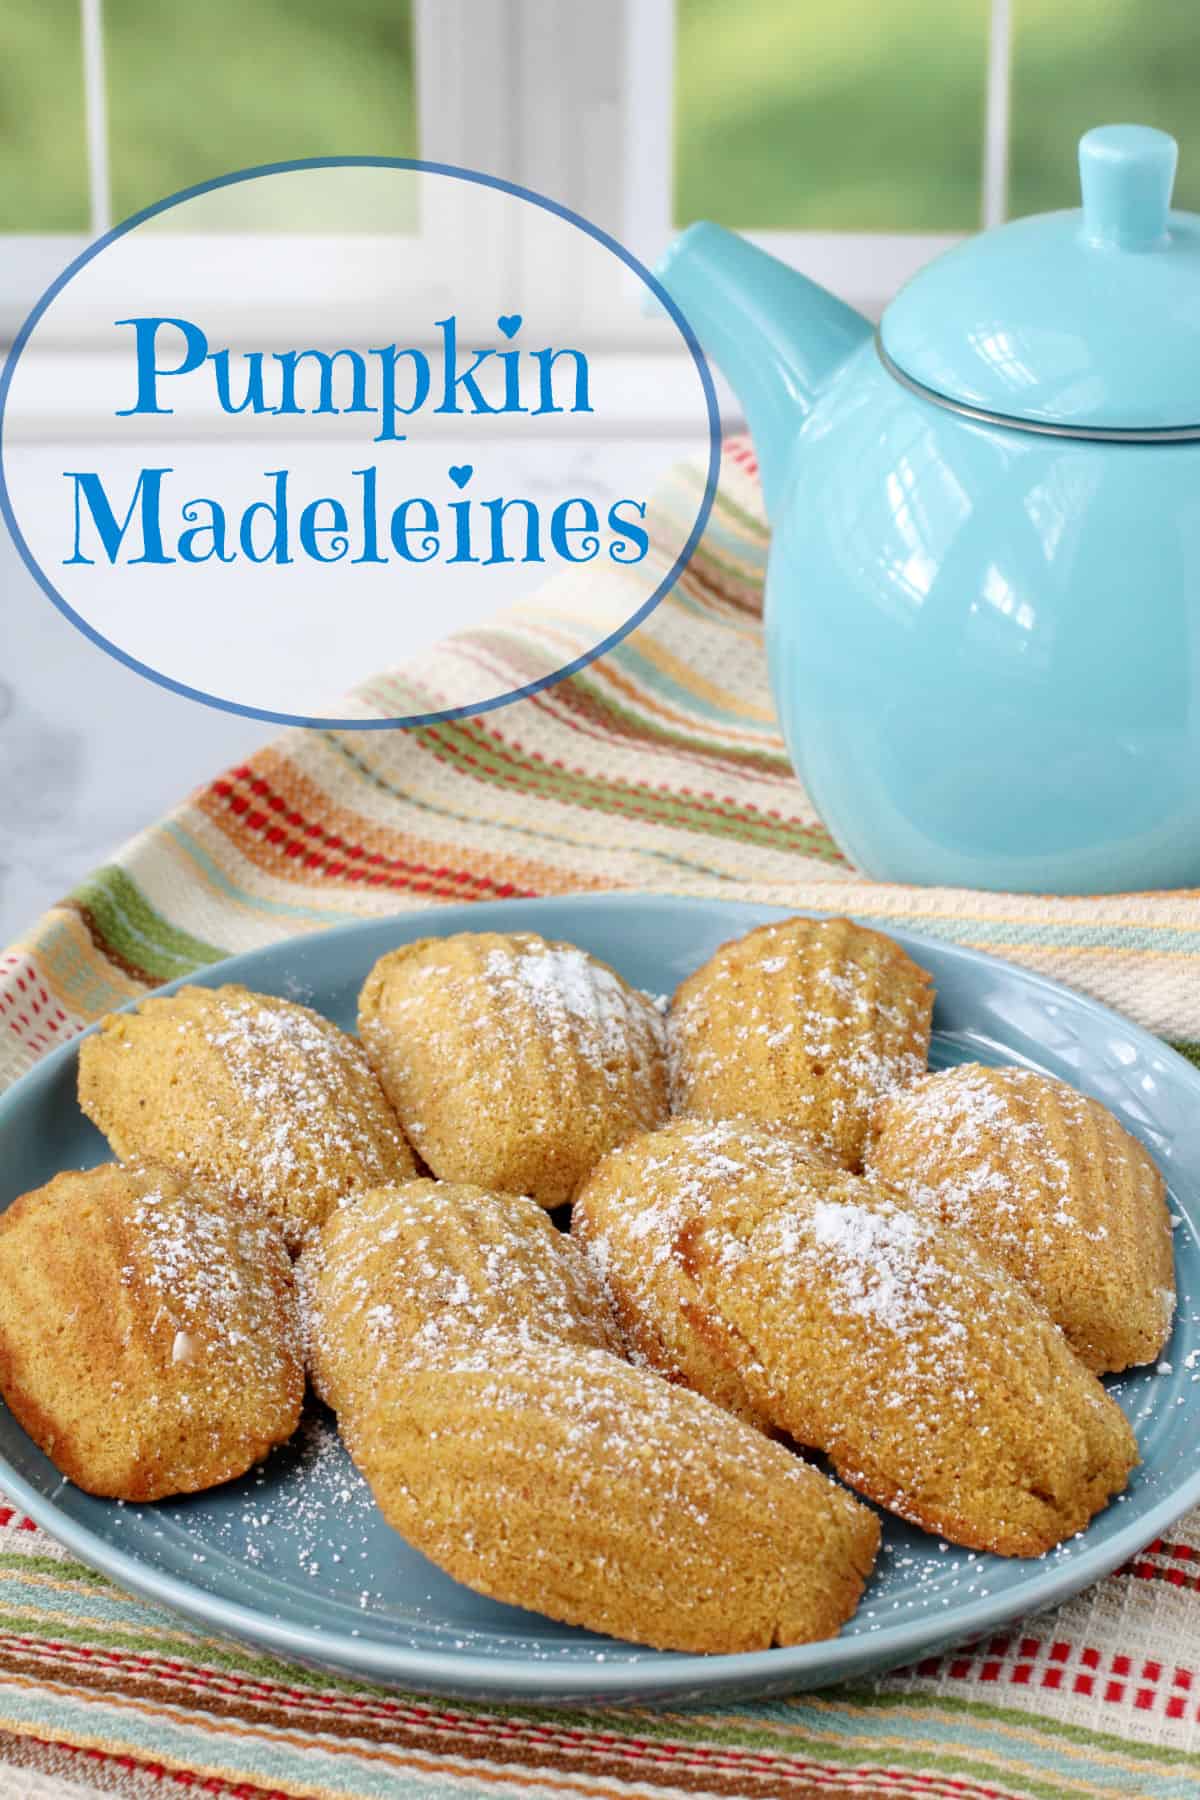 Pumpkin Madeleines on a blue plate and sprinkled with powdered sugar.